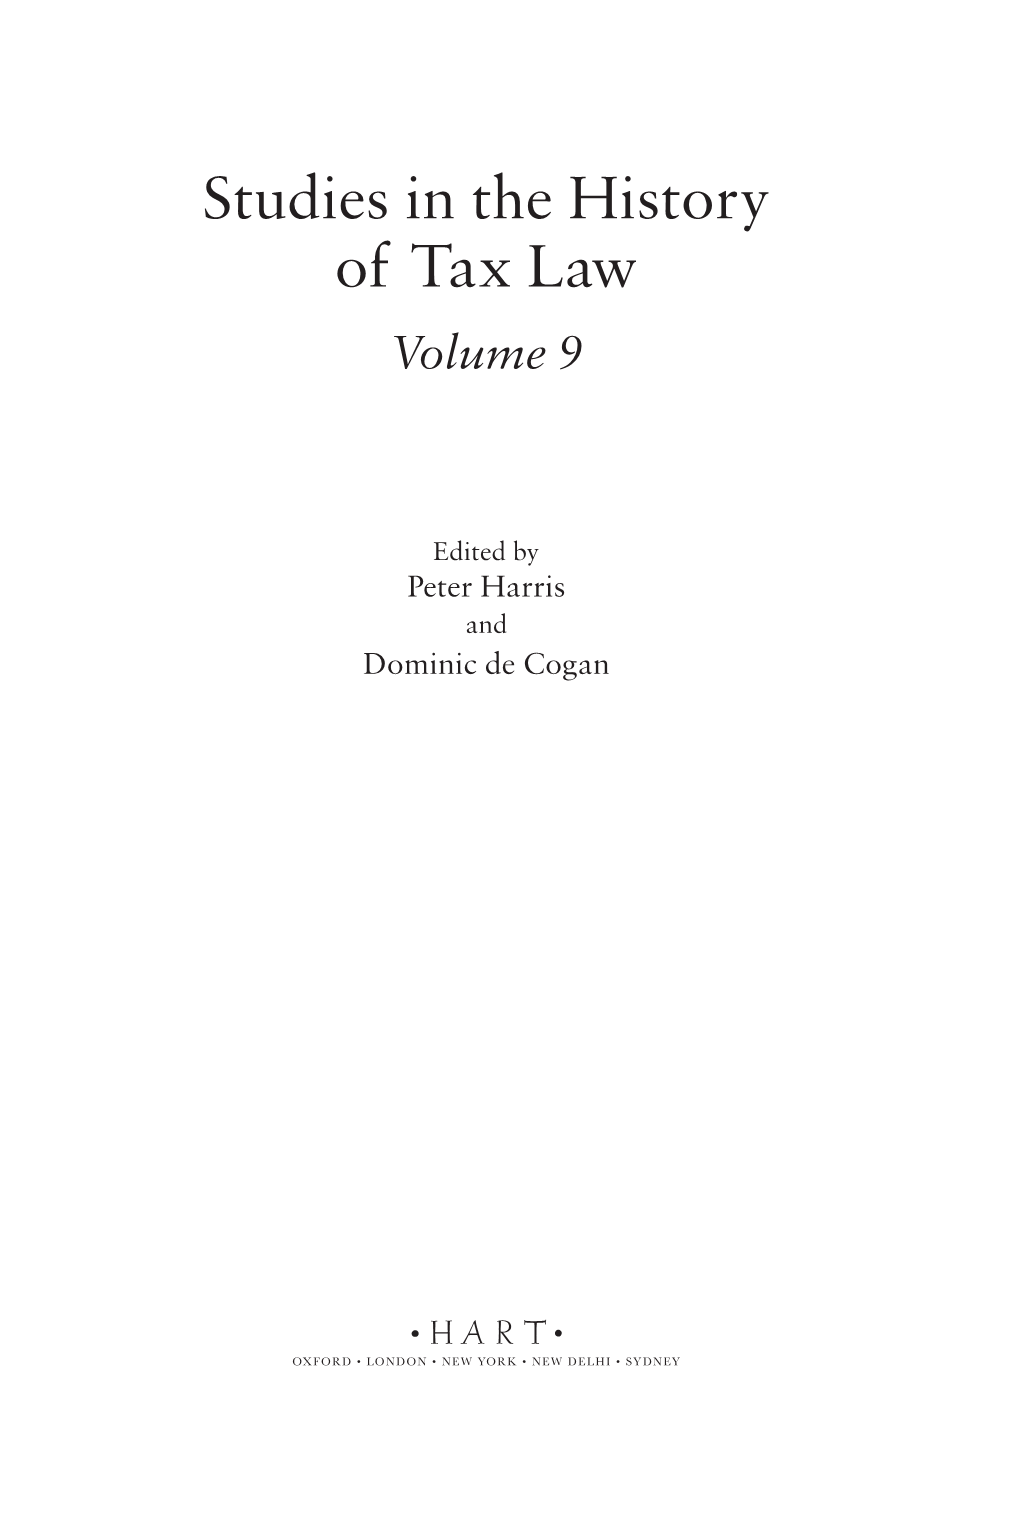 Studies in the History of Tax Law Volume 9